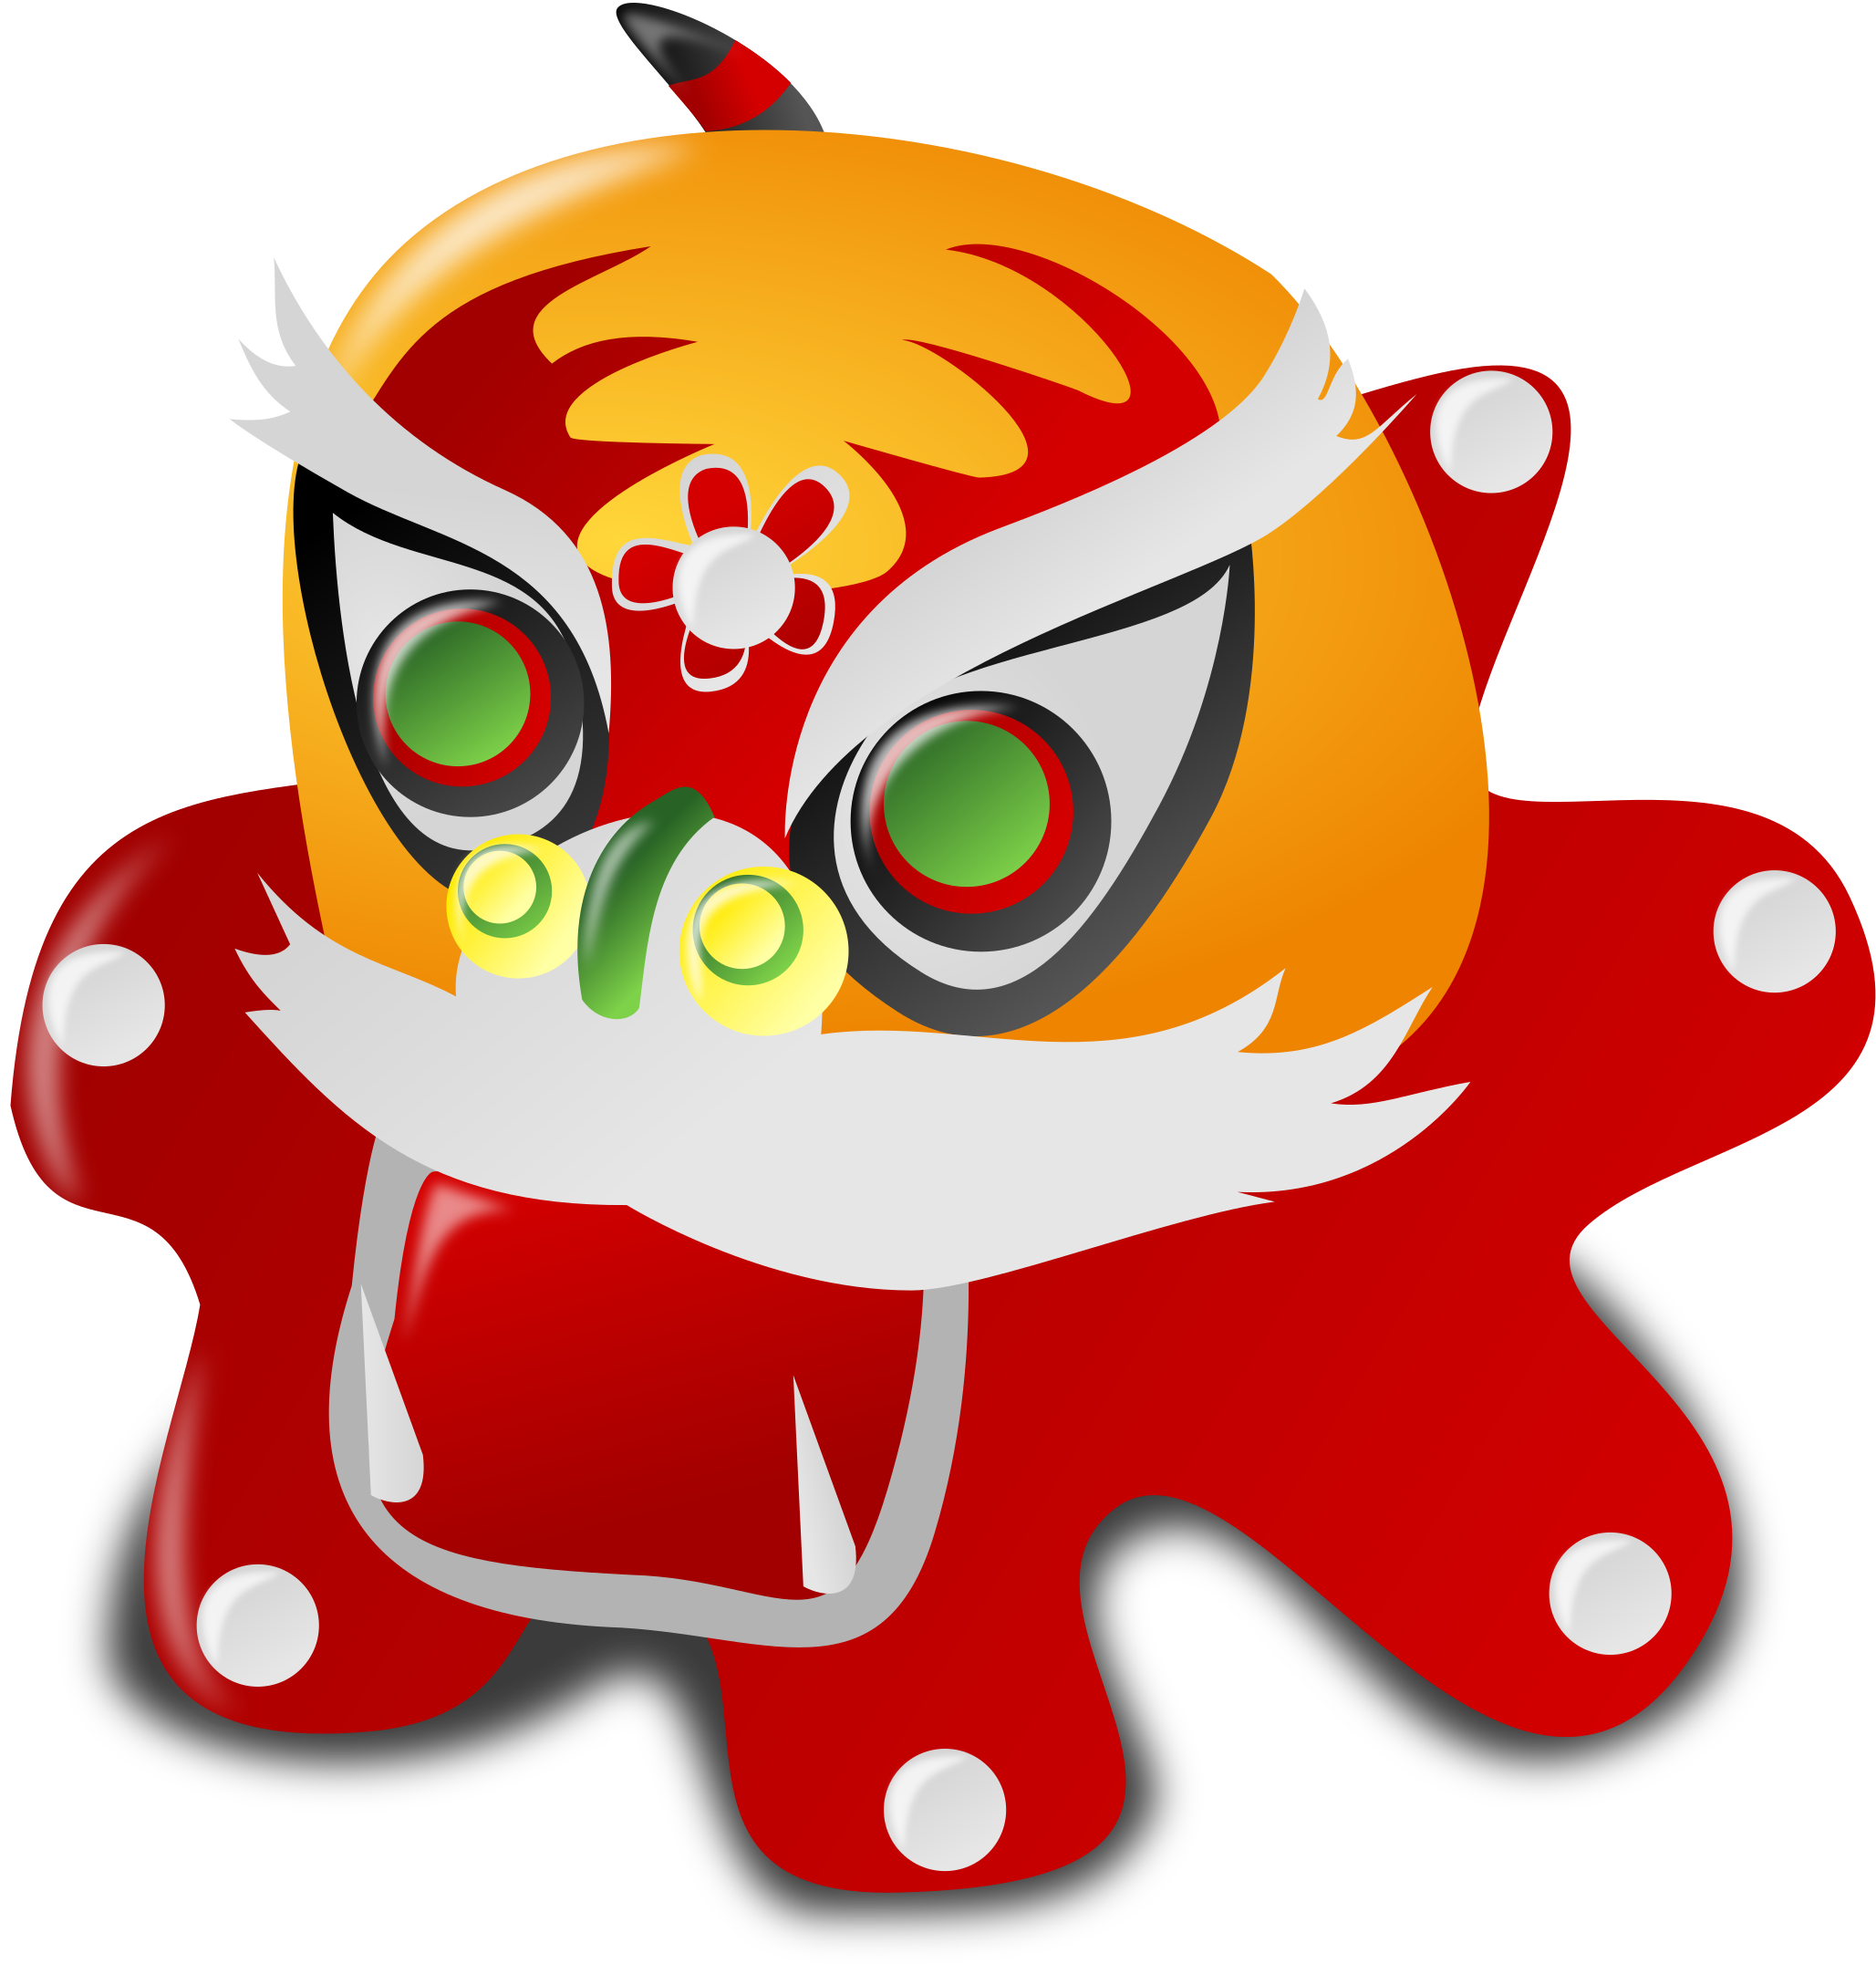 Chinese New Year Lion Dance Graphic PNG